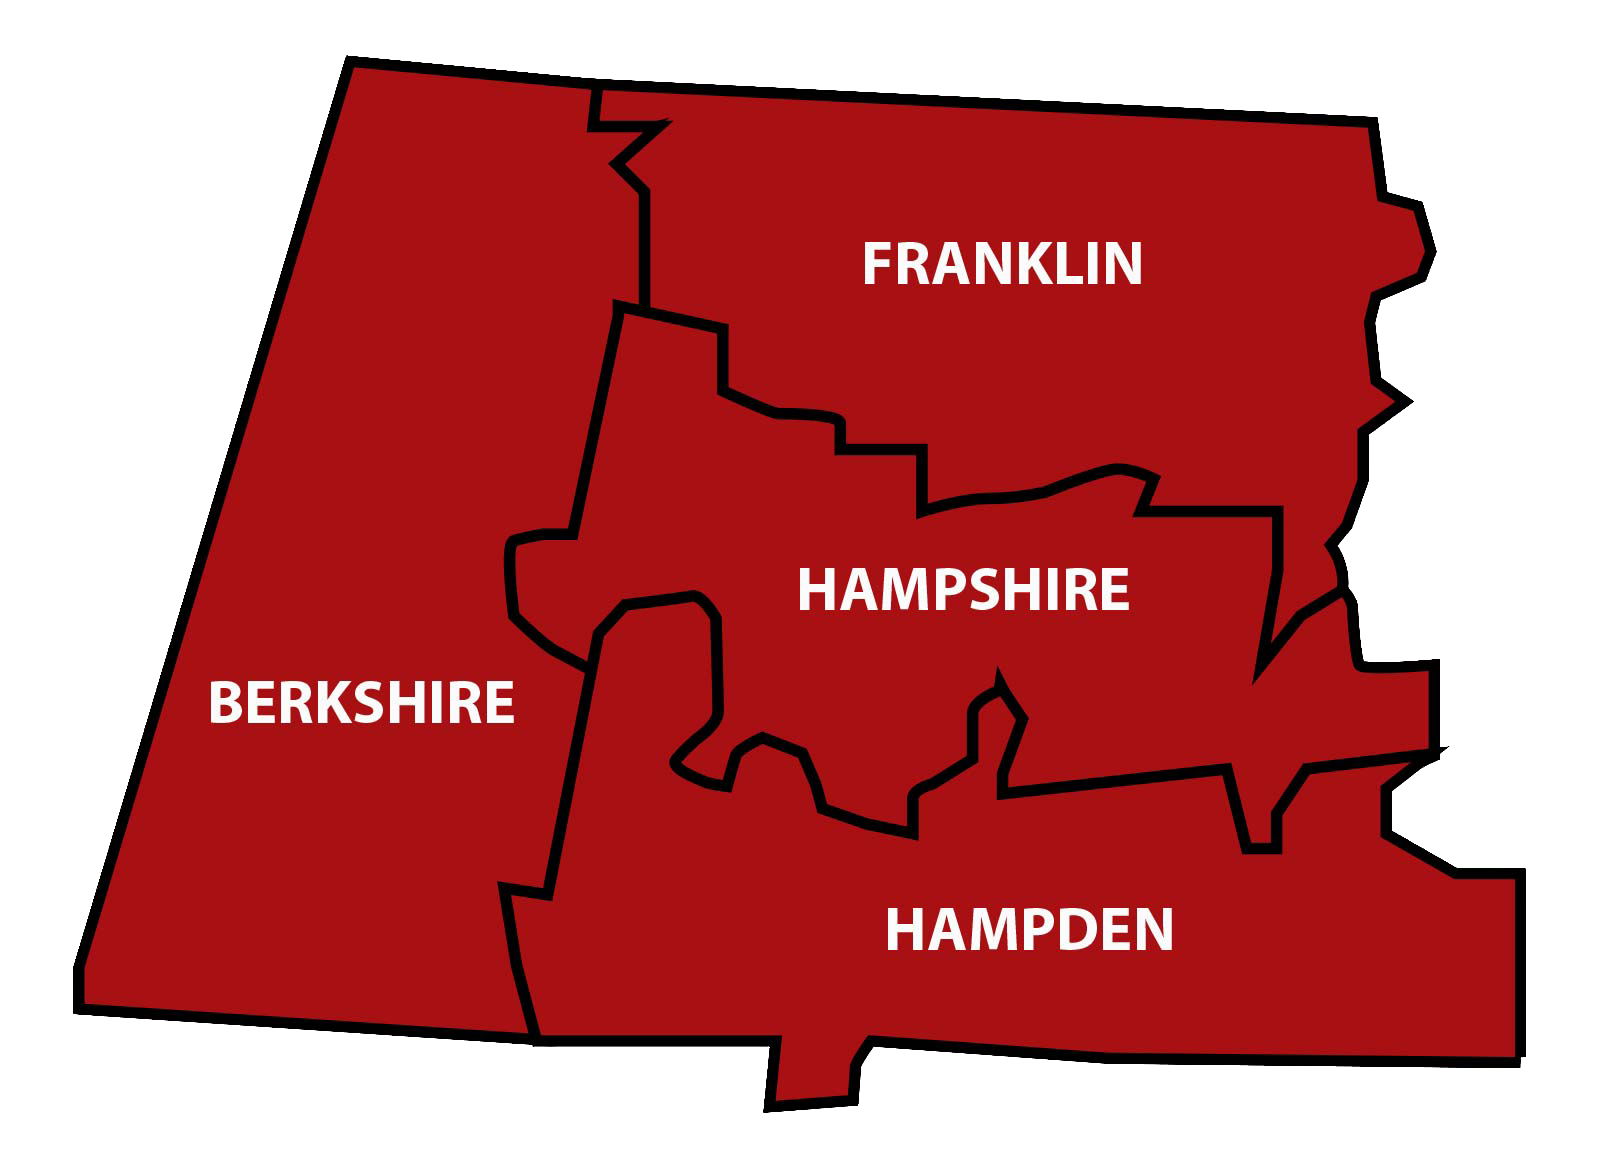 map of Berkshire, Hampshire, Hampden and Franklin counties